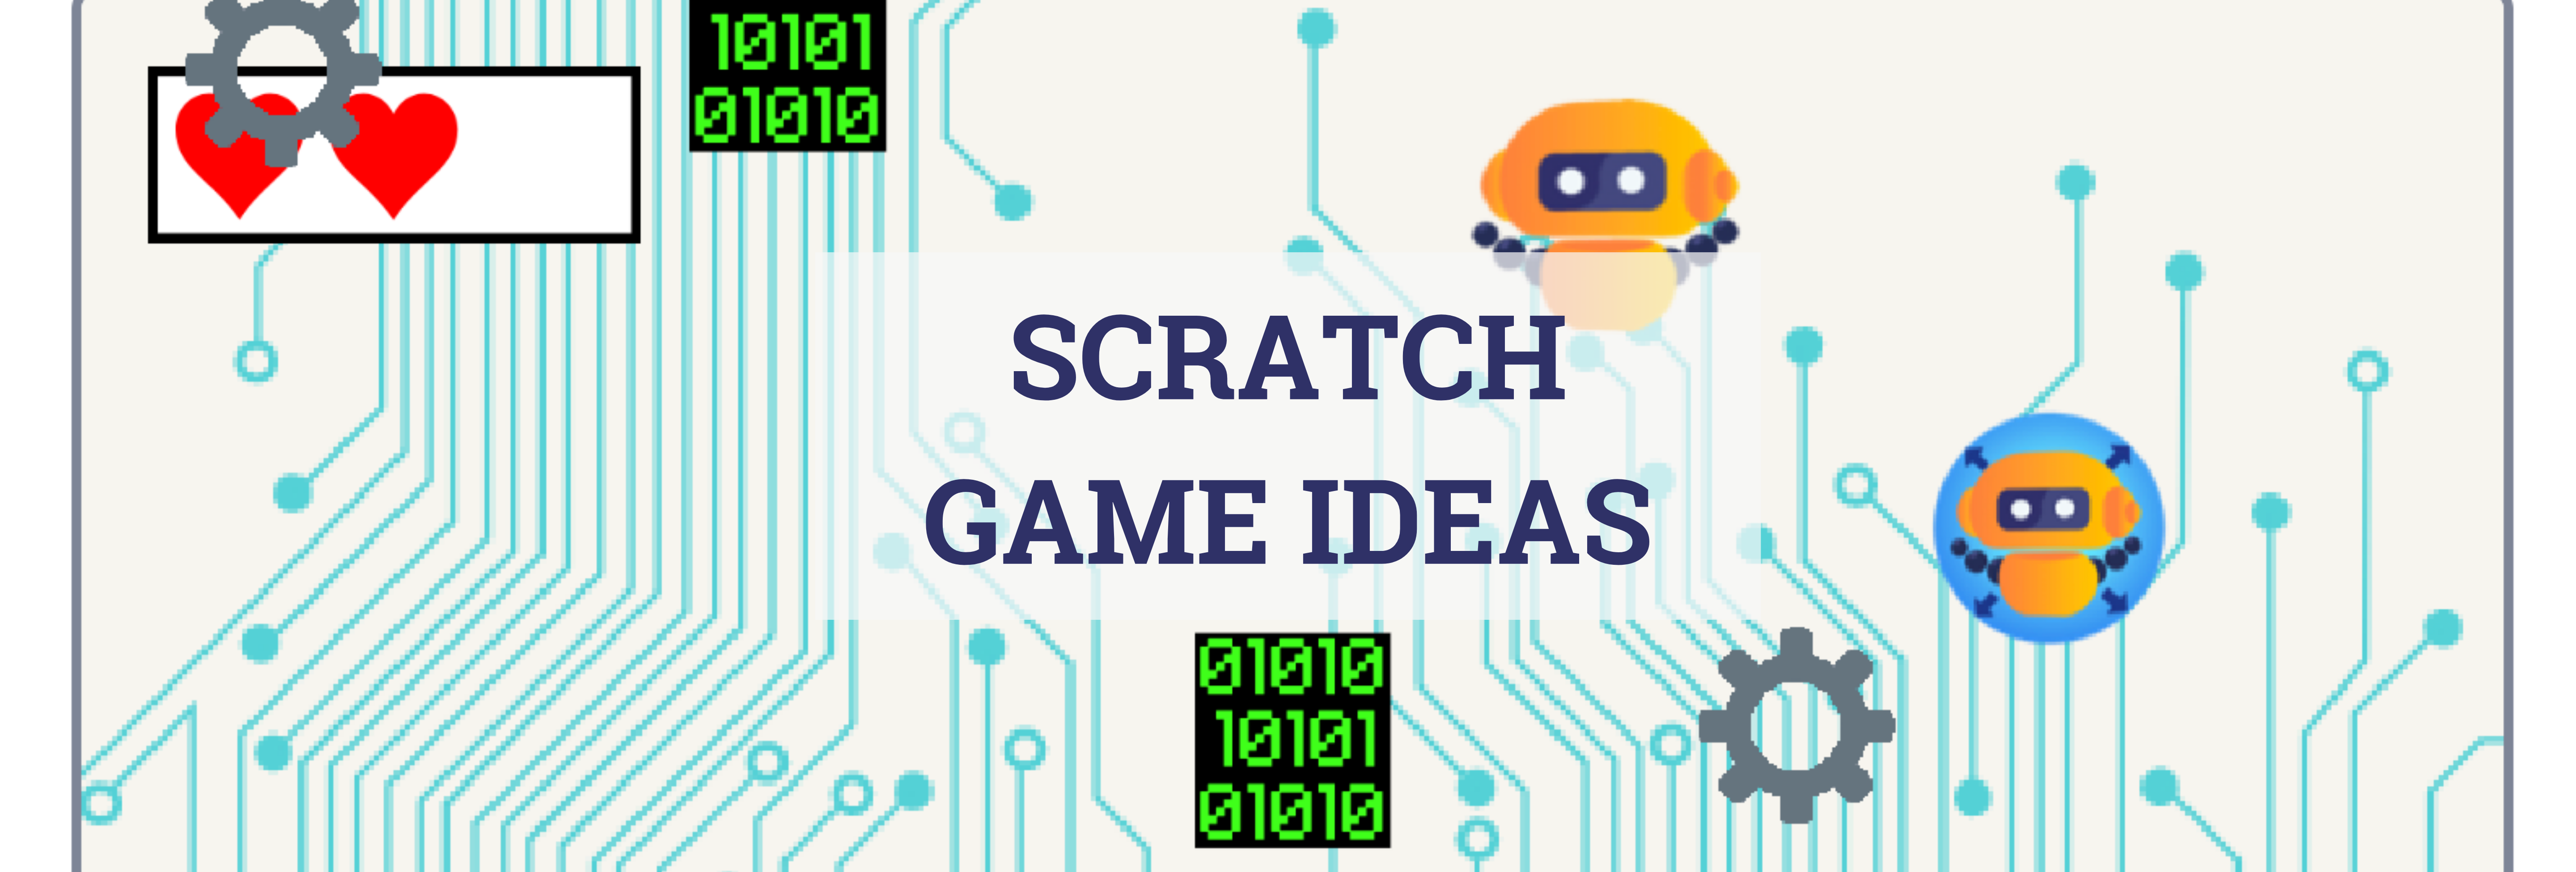 Best Scratch Coding Projects for kids: Flappy Bird